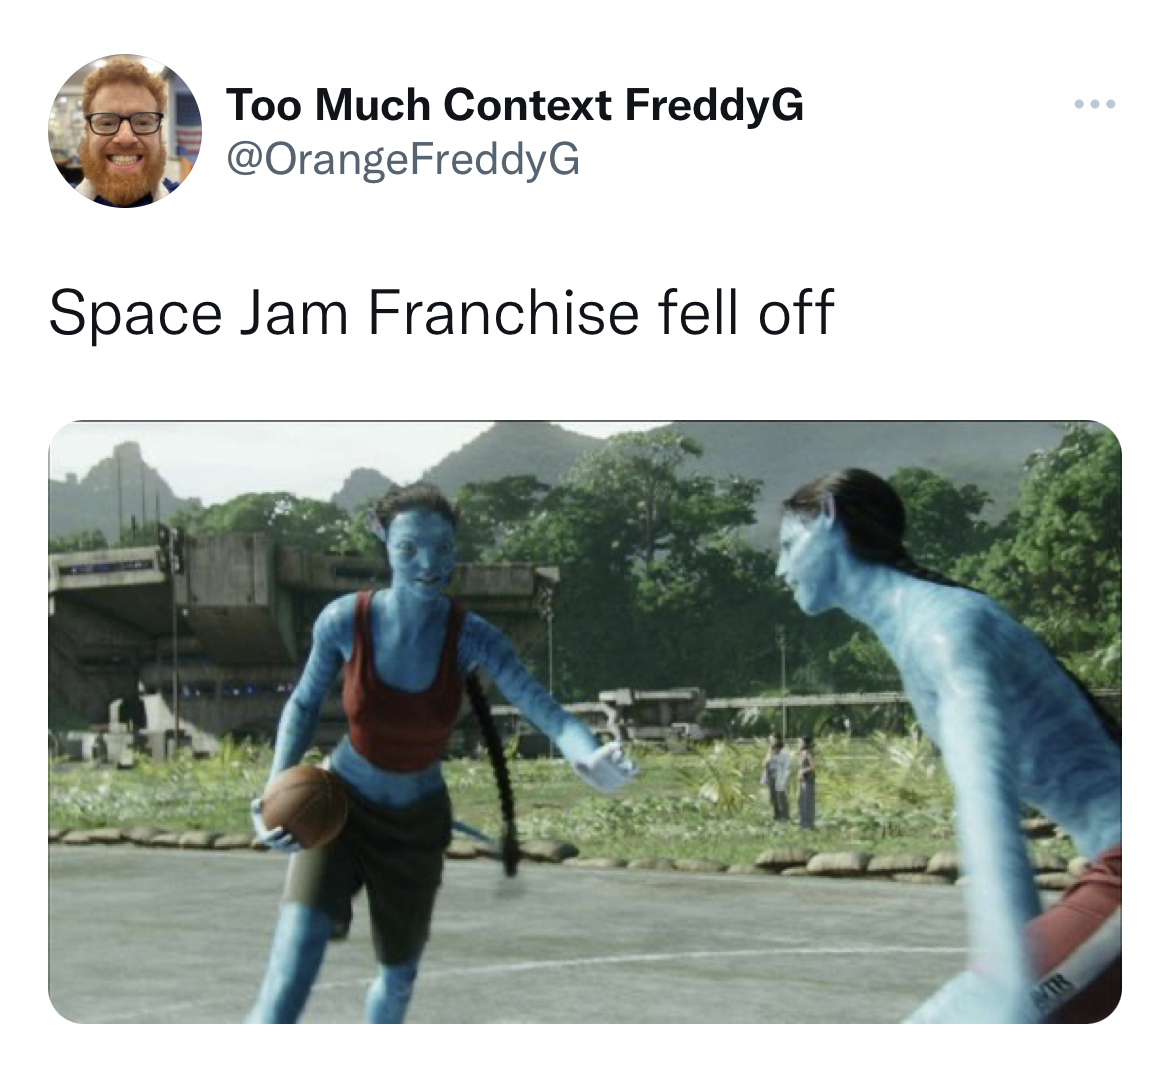 tweets dunking on celebs - water resources - Too Much Context FredyG G Space Jam Franchise fell off Ath